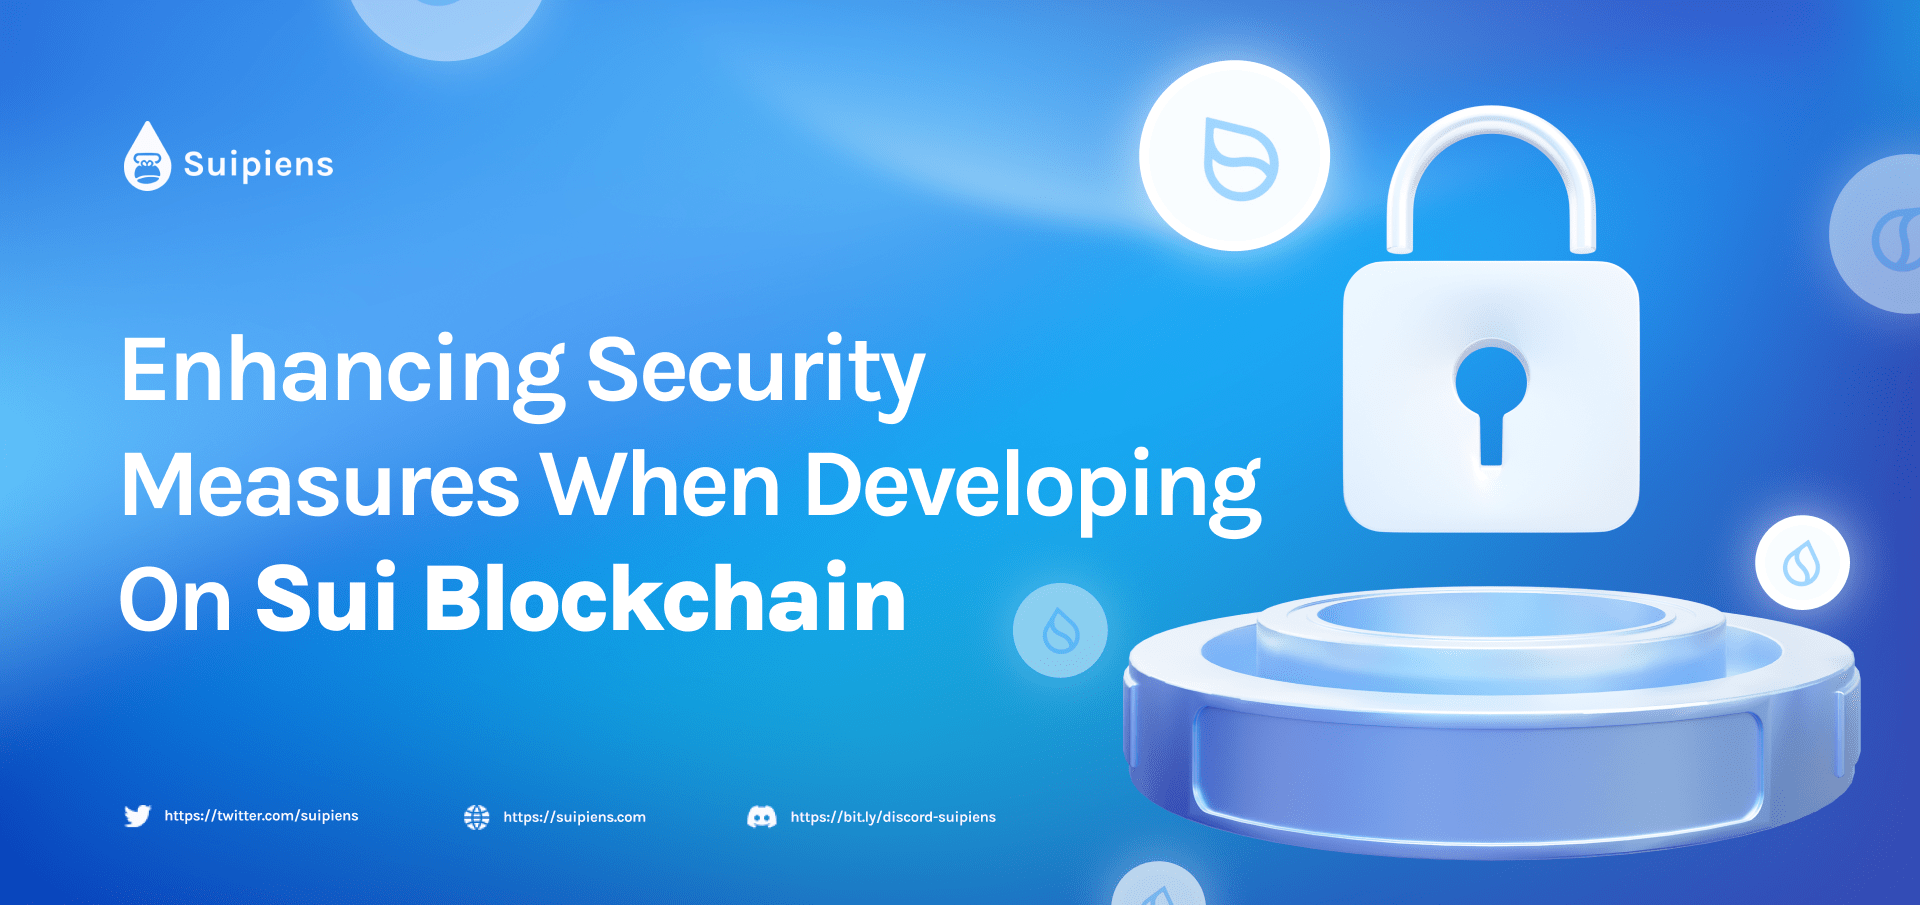 Enhancing Security Measures When Developing on Sui Blockchain